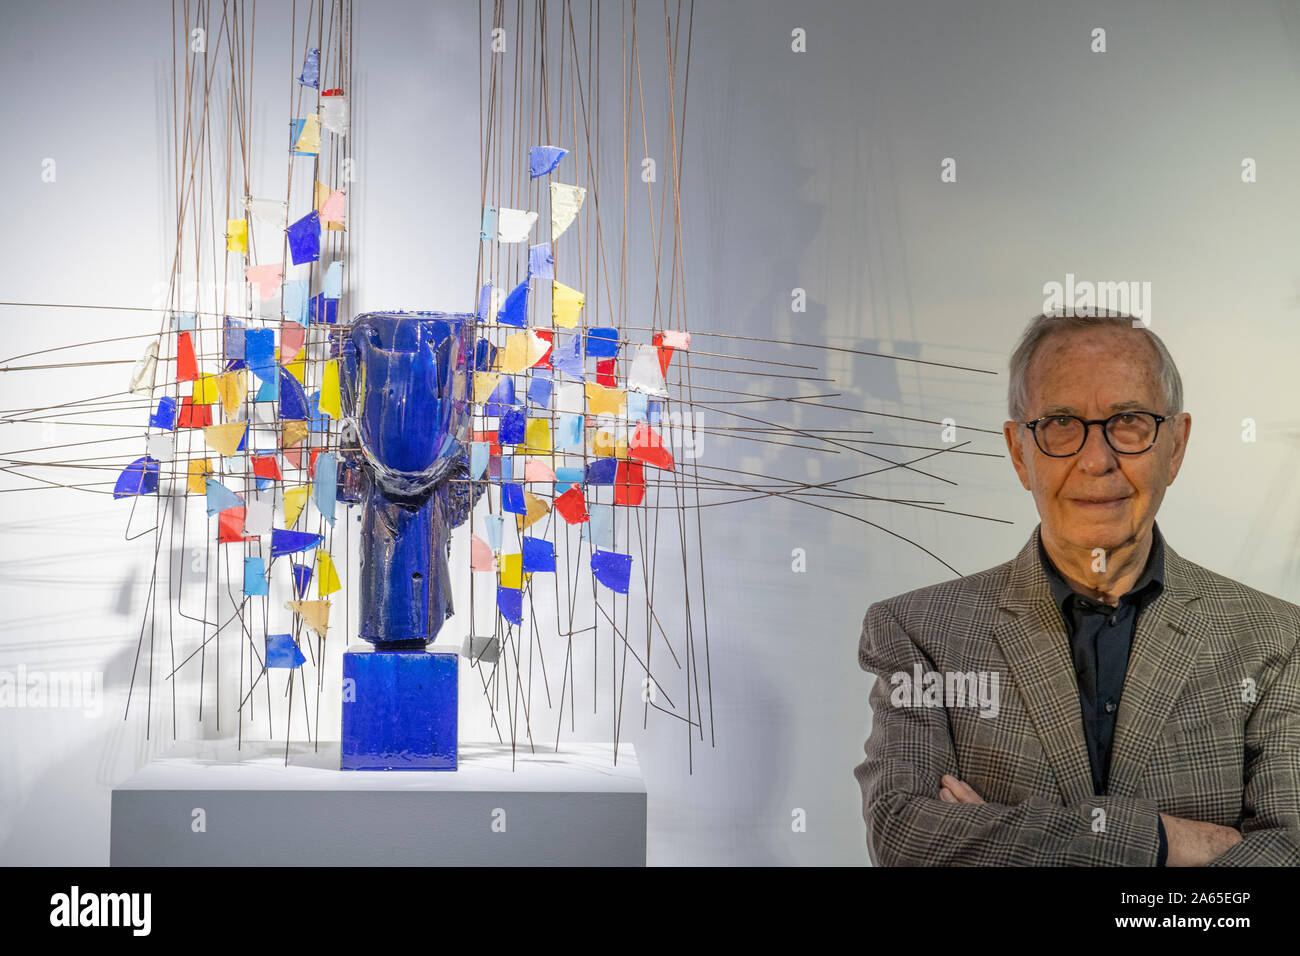 Opera Gallery, New Bond Street, London, UK. 24th October 2019. Manolo Valdes is one of the most influential Spanish contemporary artists, and one of the most revolutionary creative forces in his home country. Image: The Artist with Cabeza Azul con Resina Roja, 2018. Credit: Malcolm Park/Alamy Live News. Stock Photo